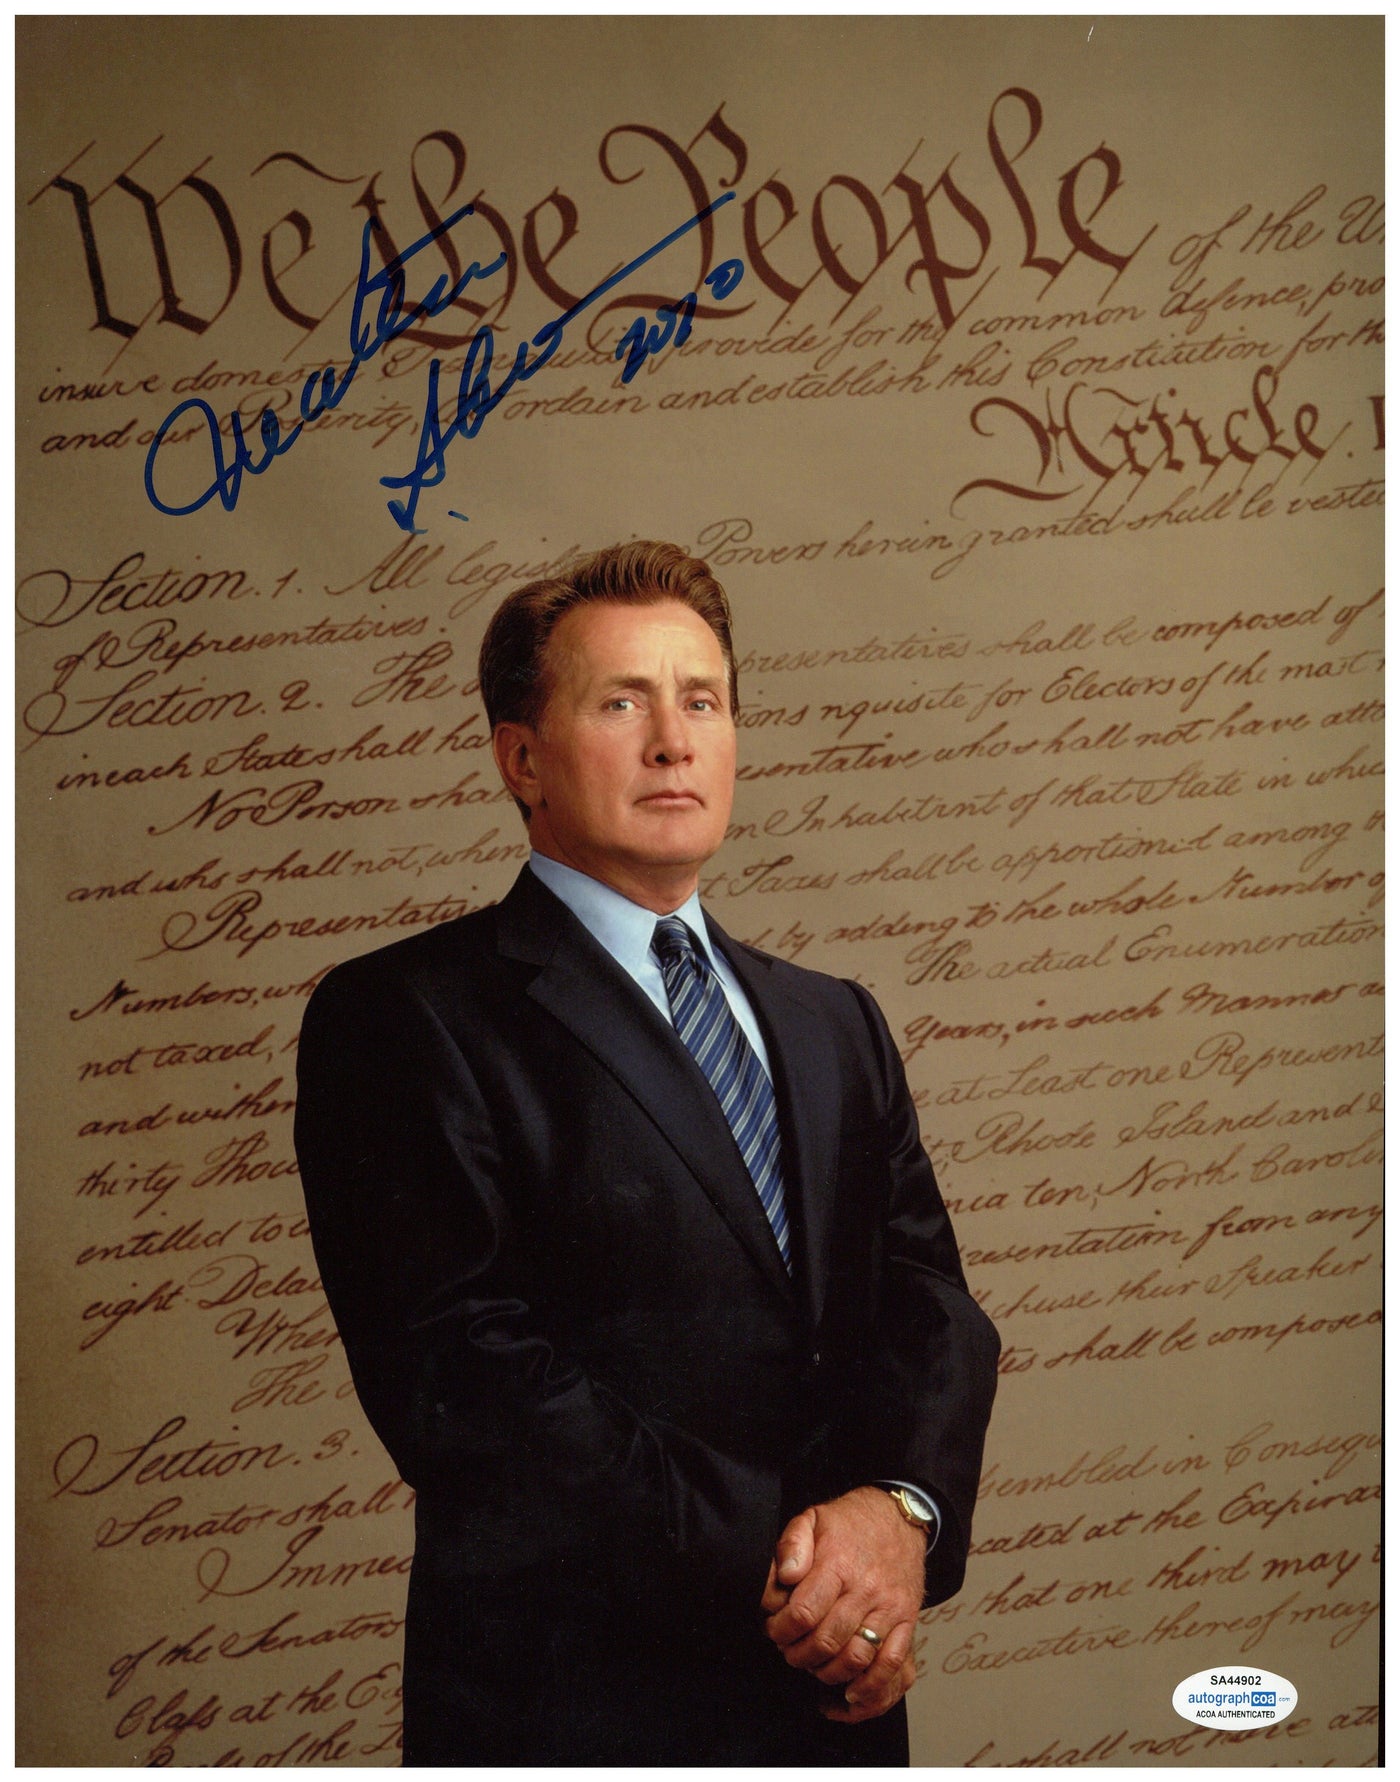 Martin Sheen Signed 11x14 Photo The West Wing Jed Autographed AutographCOA